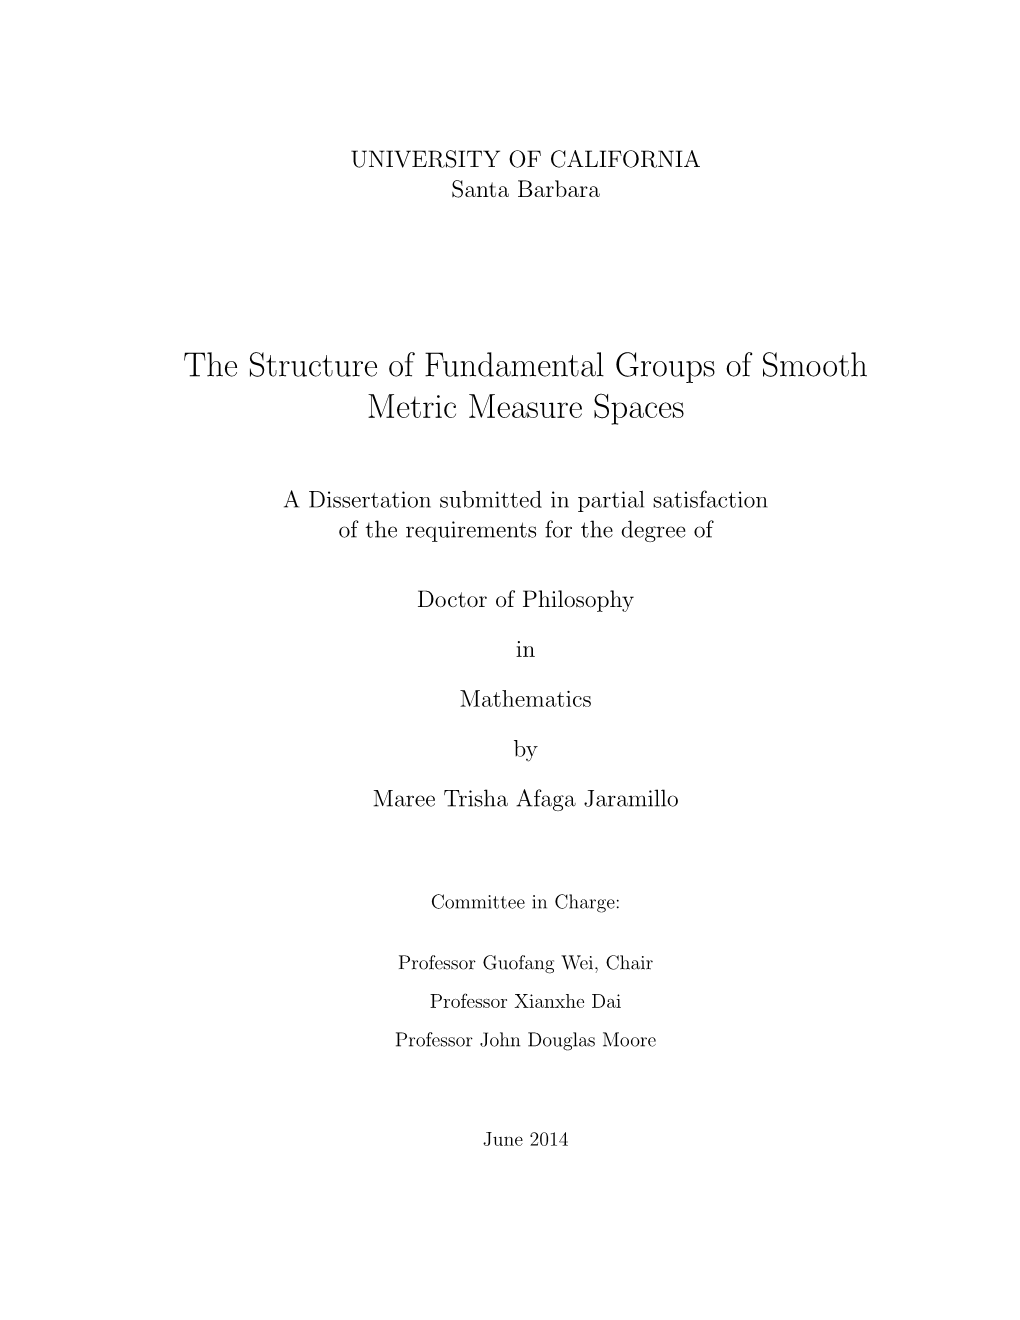 The Structure of Fundamental Groups of Smooth Metric Measure Spaces